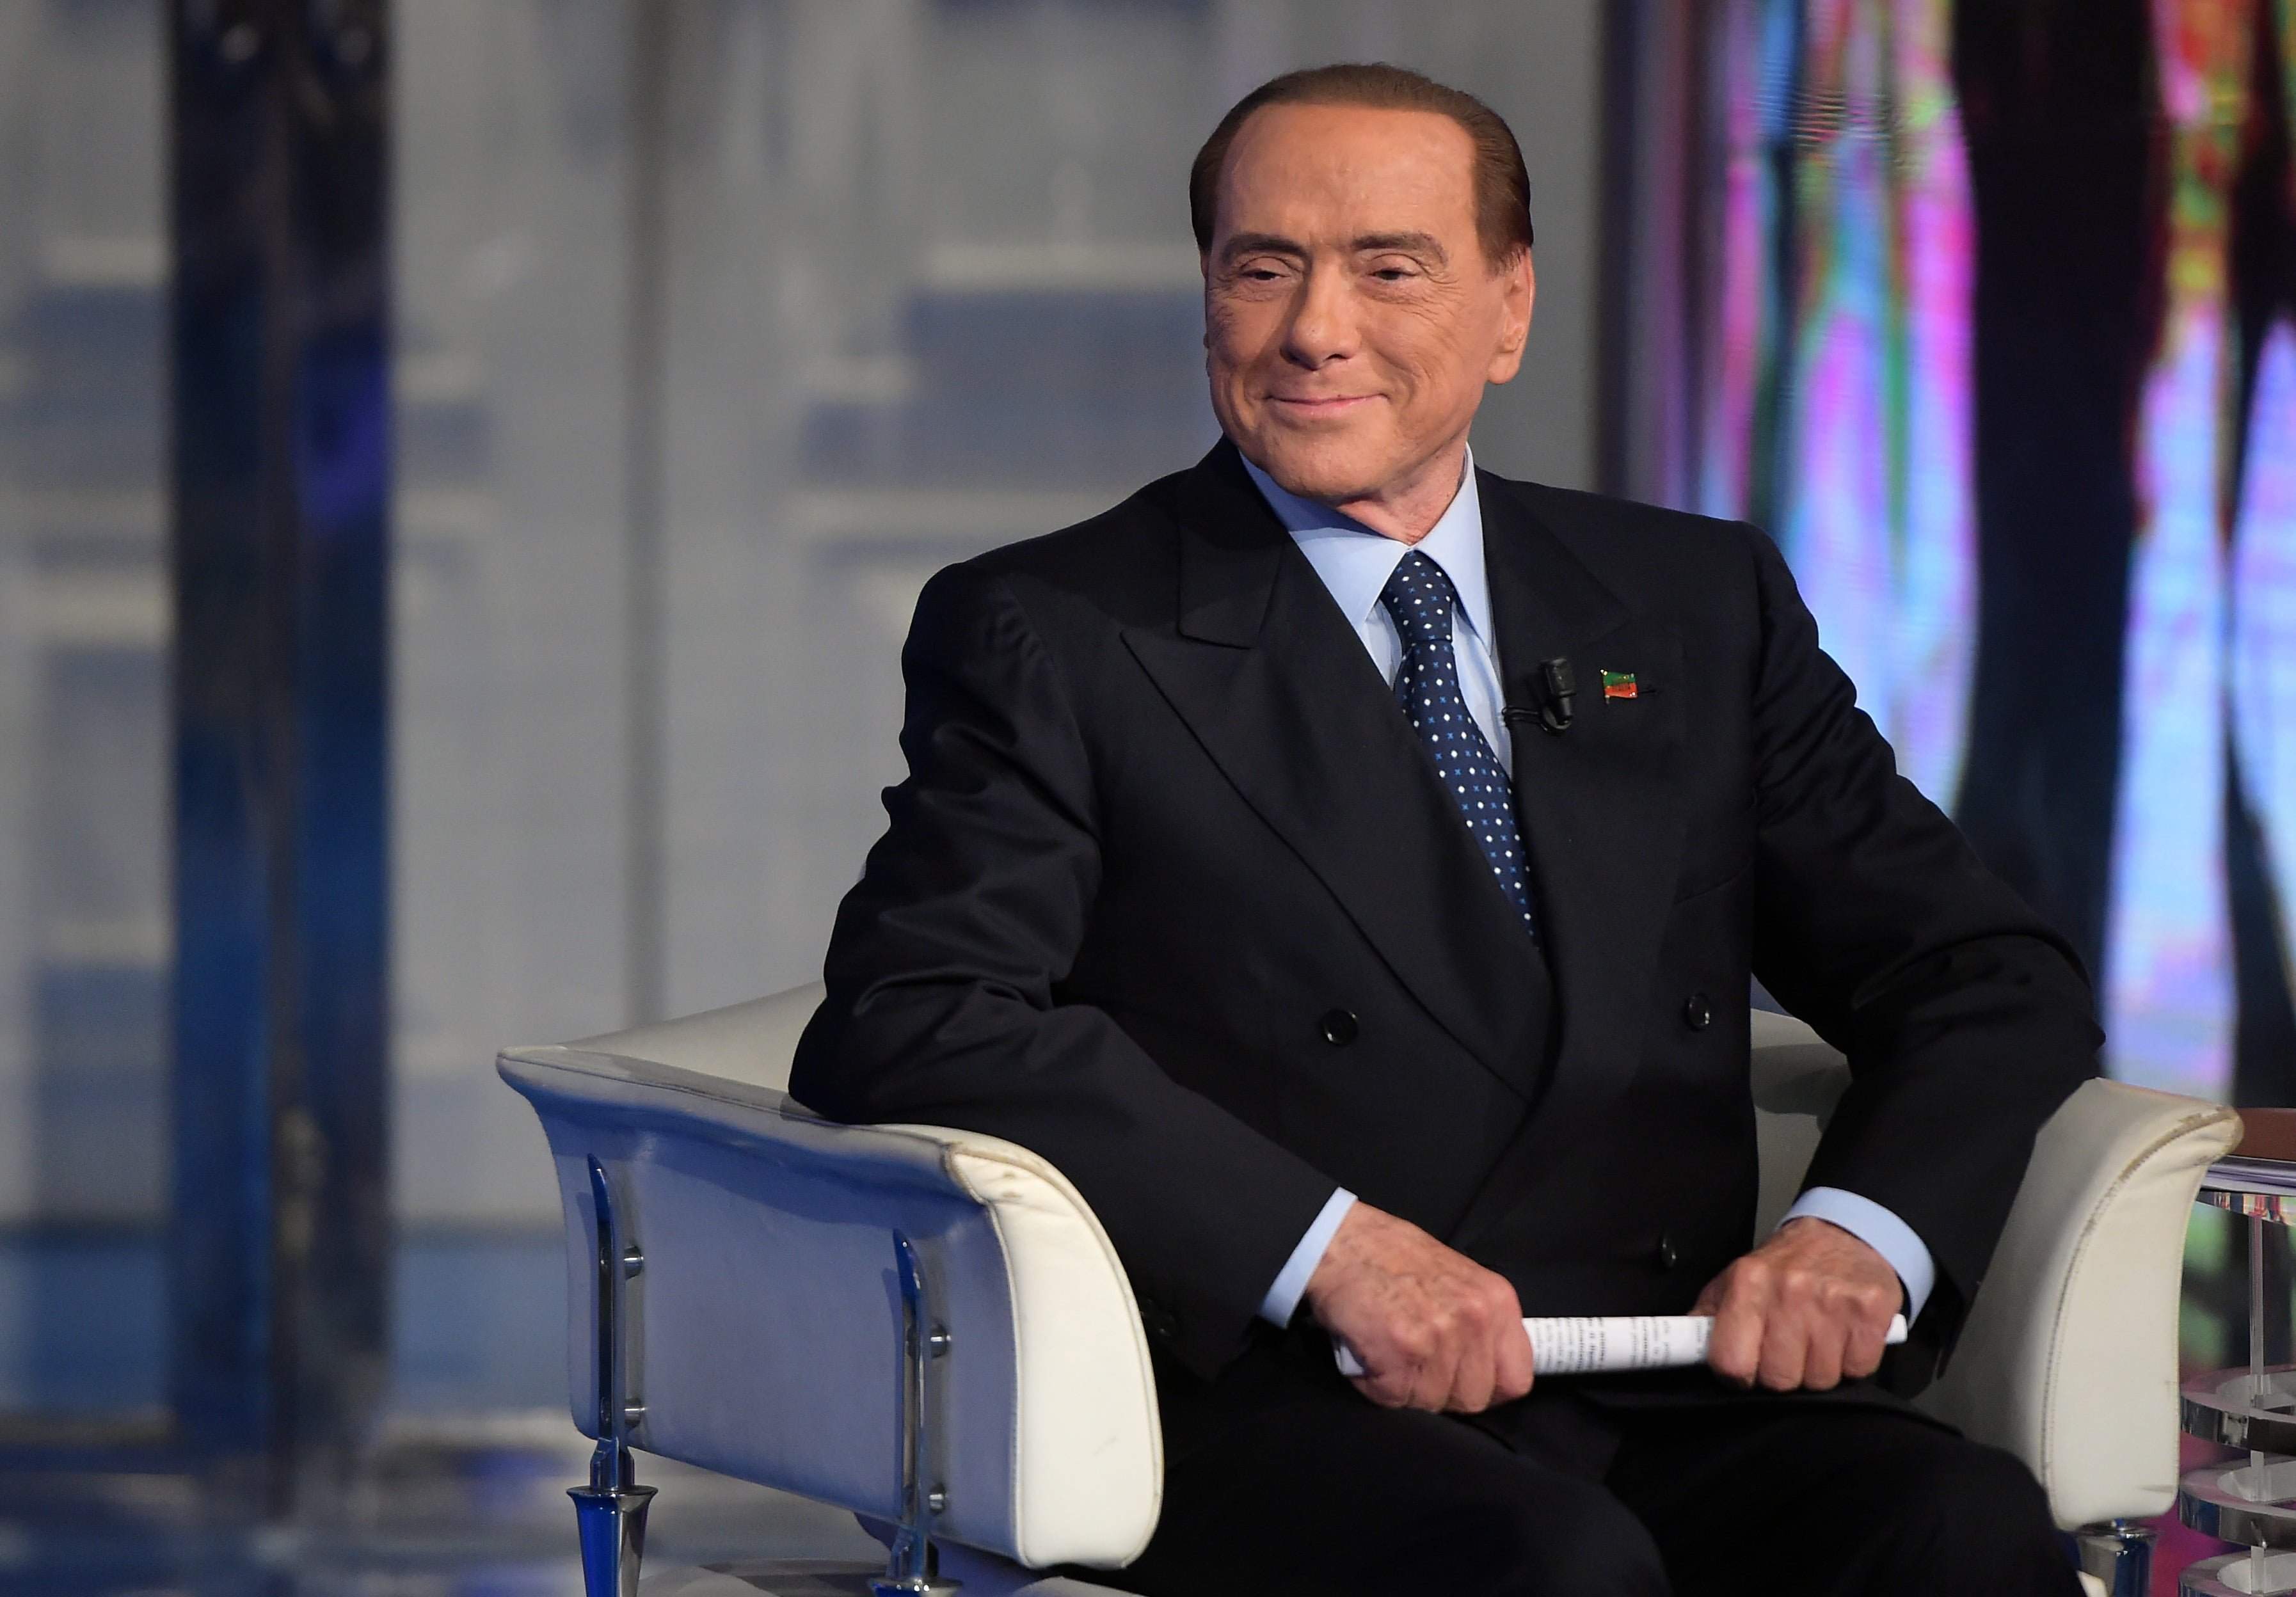 Former Italian Prime Minister Silvio Berlusconi attends the political TV show Porta A Porta at RAI's broadcast studios in Rome, Italy on November 16, 2017. At age 81, Berlusconi hopes to make a political comeback as leader of a center-right coalition in Italy's election next year. Photo by Eric Vandeville/ABACAPRESS.COM FOT. ABACA/NEWSPIX.PL POLAND ONLY! --- Newspix.pl *** Local Caption *** www.newspix.pl mail us: info@newspix.pl call us: 0048 022 23 22 222 --- Polish Picture Agency by Ringier Axel Springer Poland